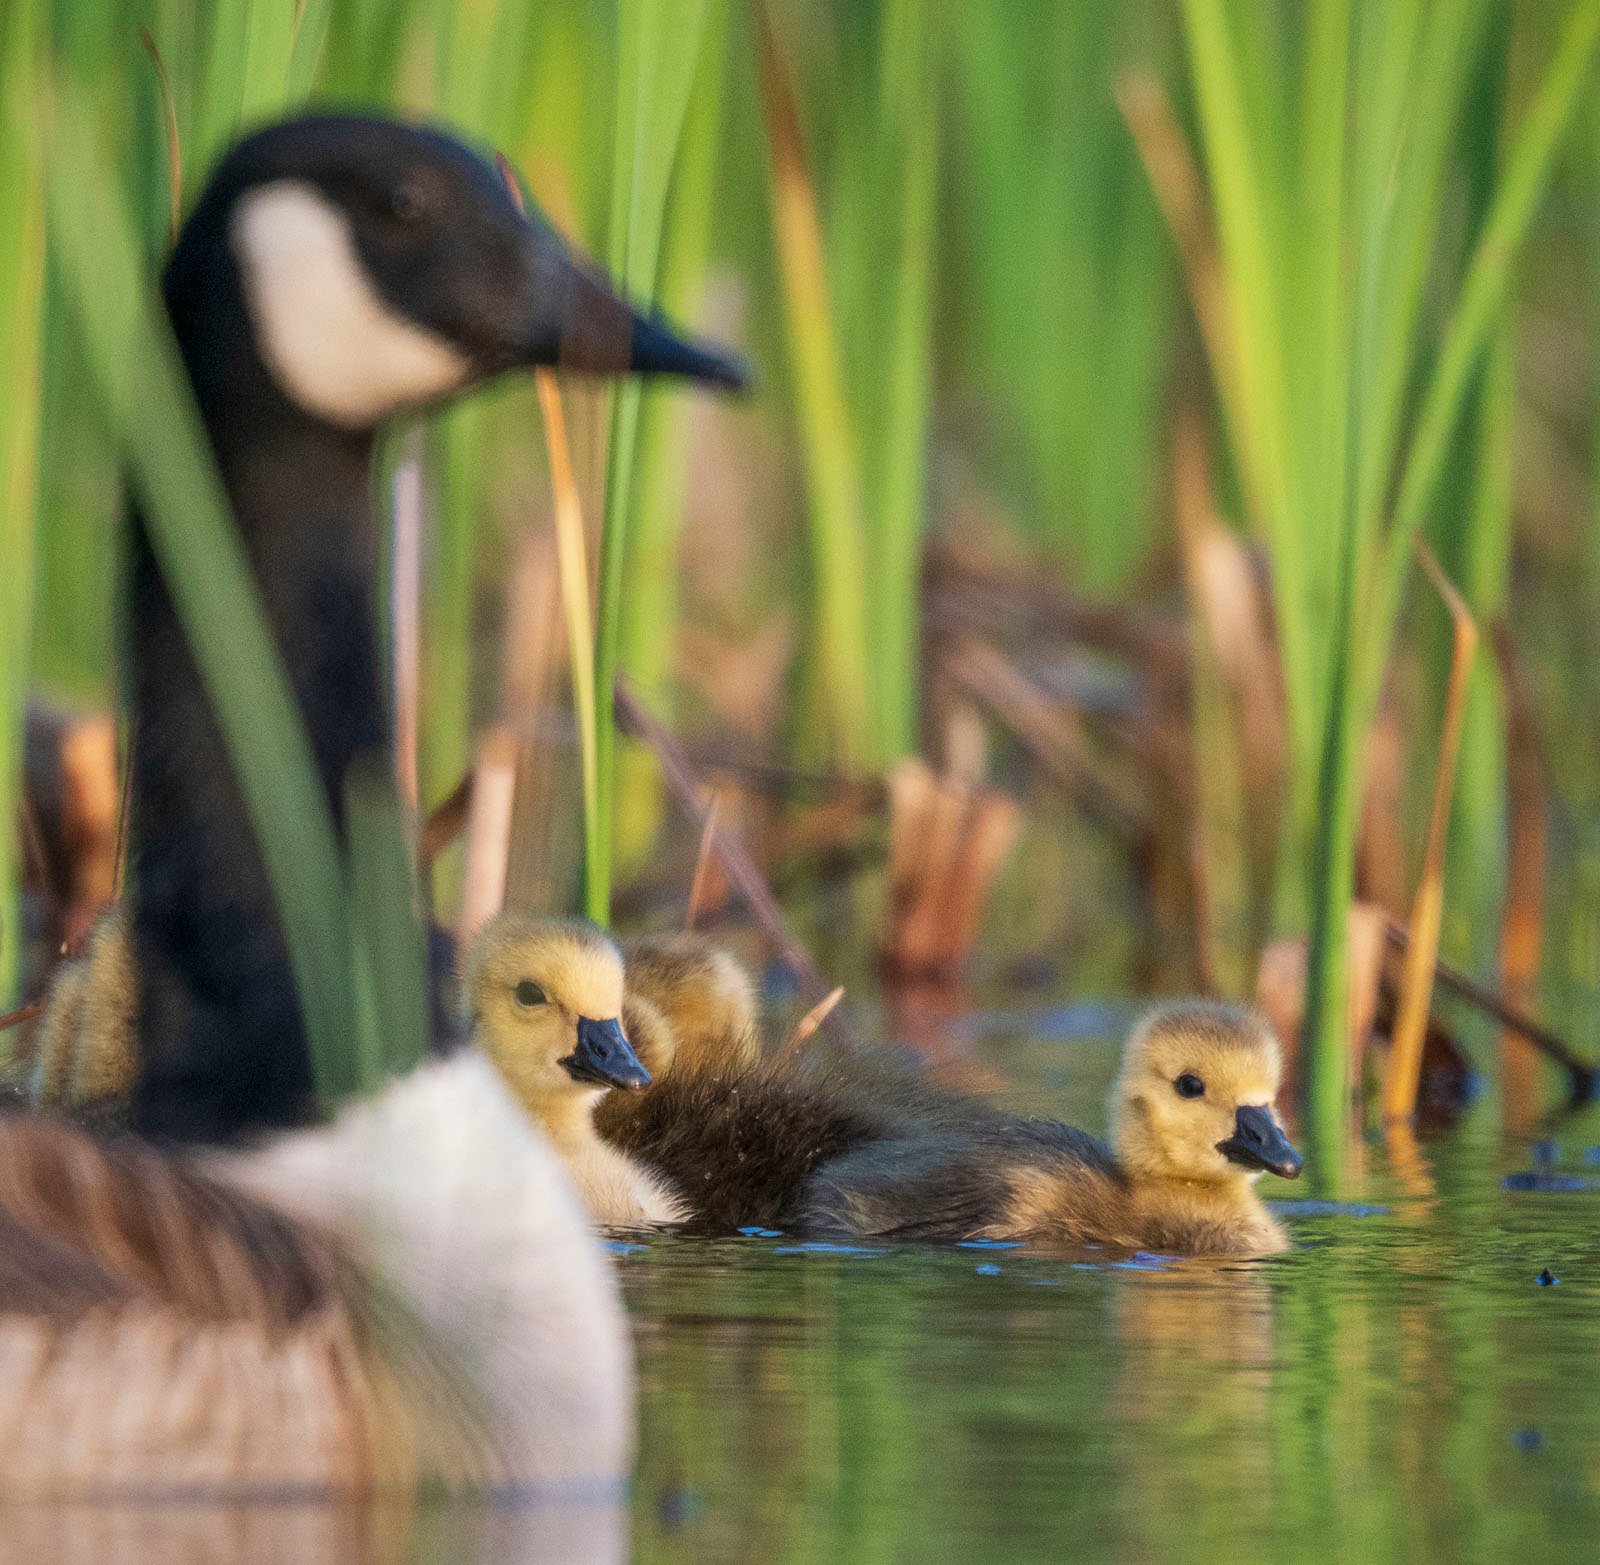 A close-up image of a goose and its three goslings swimming in a pond surrounded by tall green reeds. The adult goose is in the foreground, slightly out of focus, while the fluffy yellow goslings are in the background, more prominently visible.